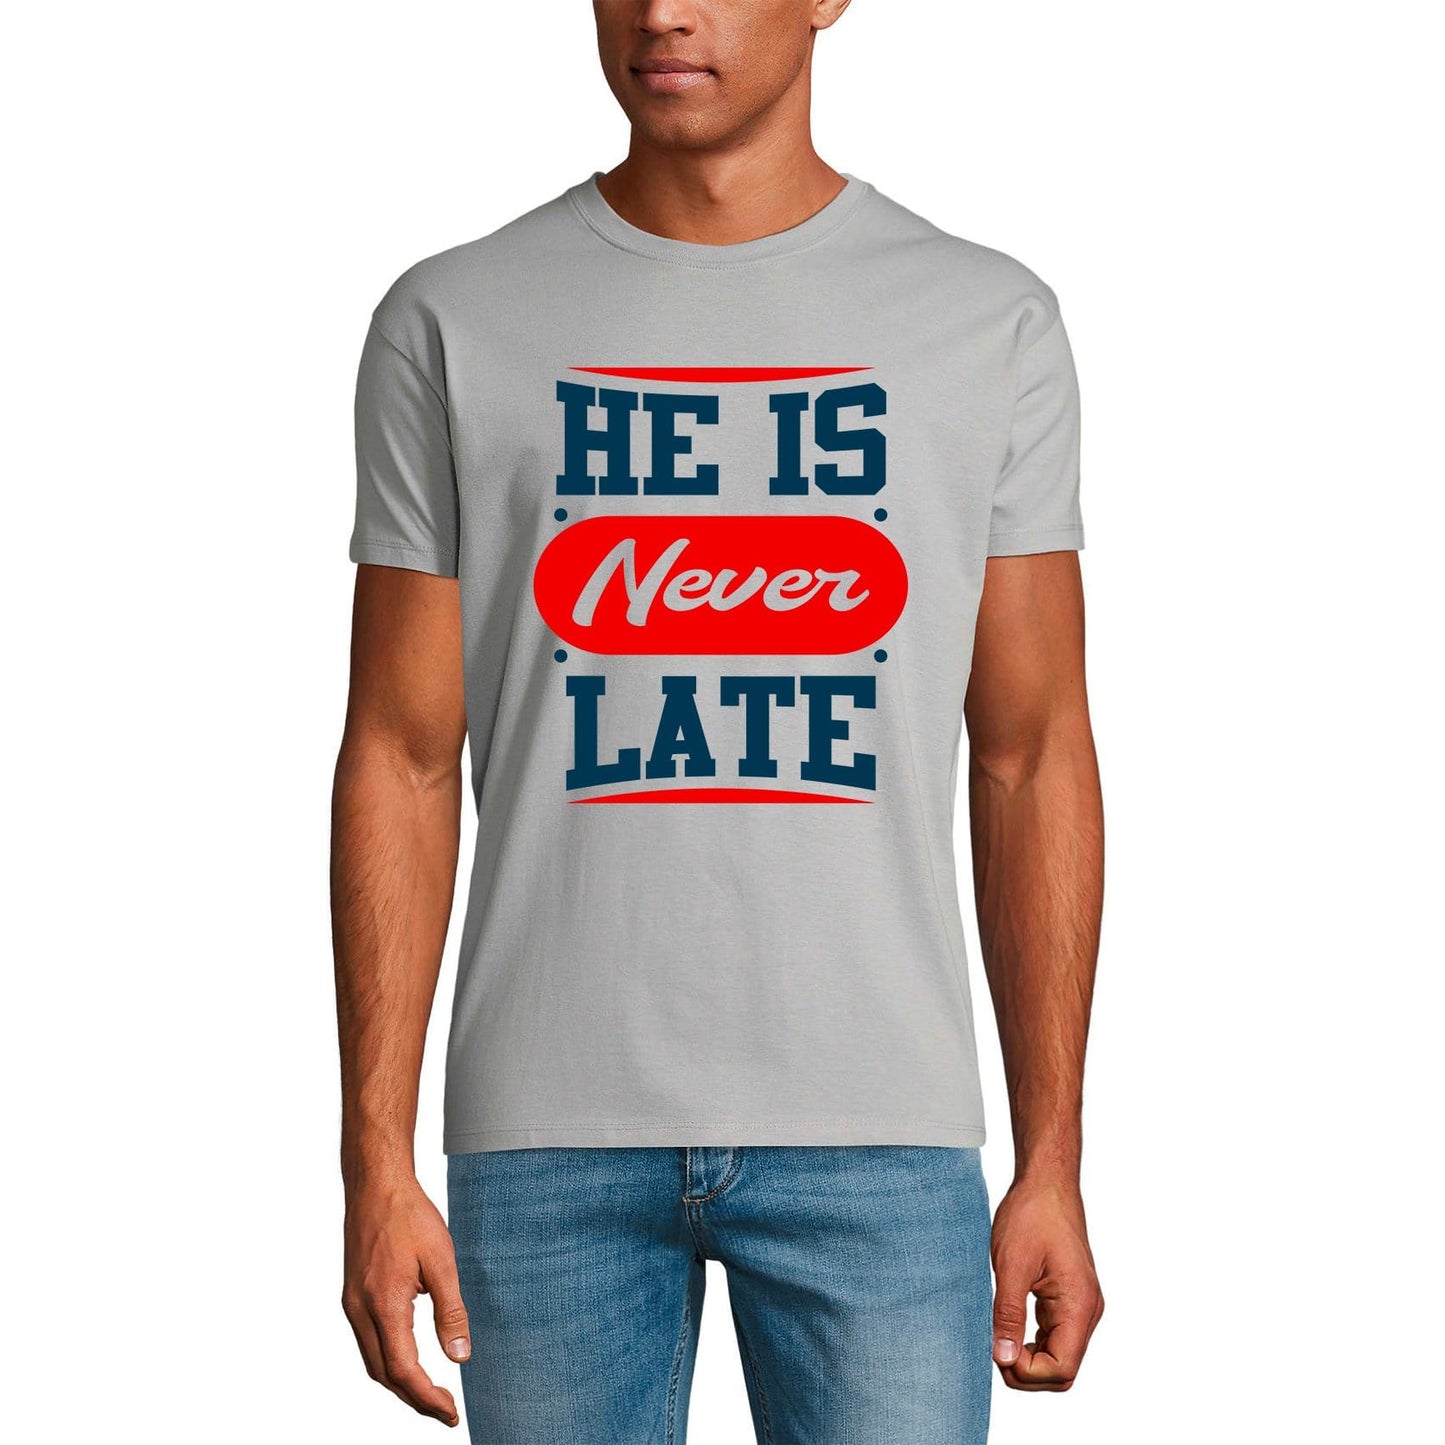 ULTRABASIC Graphic Men's T-Shirt He Is Never Late - Motivational Message